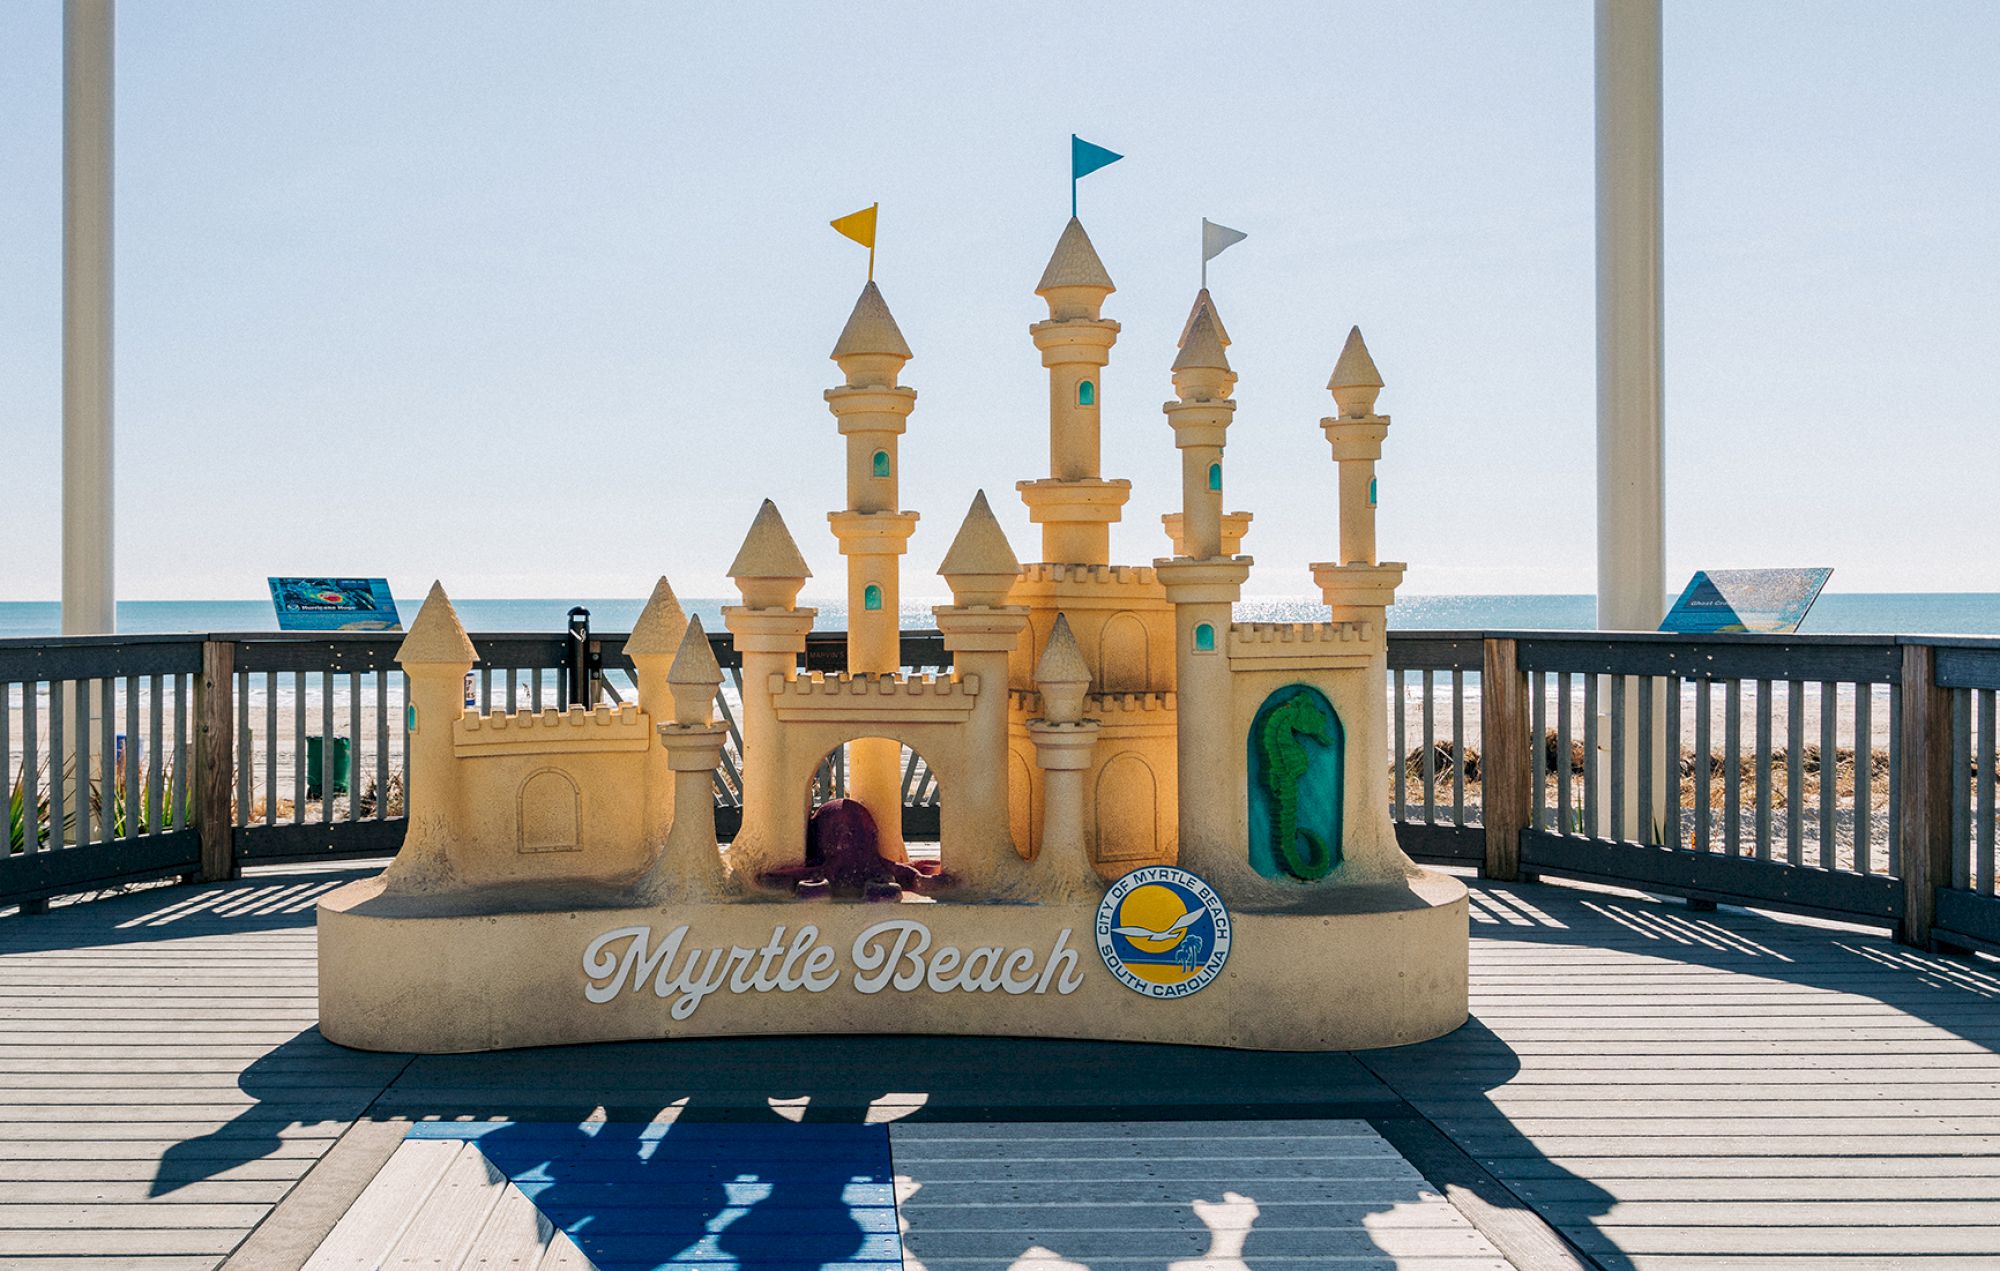 A sandcastle sculpture with "Myrtle Beach" written at the front, placed on a wooden deck with the ocean in the background.